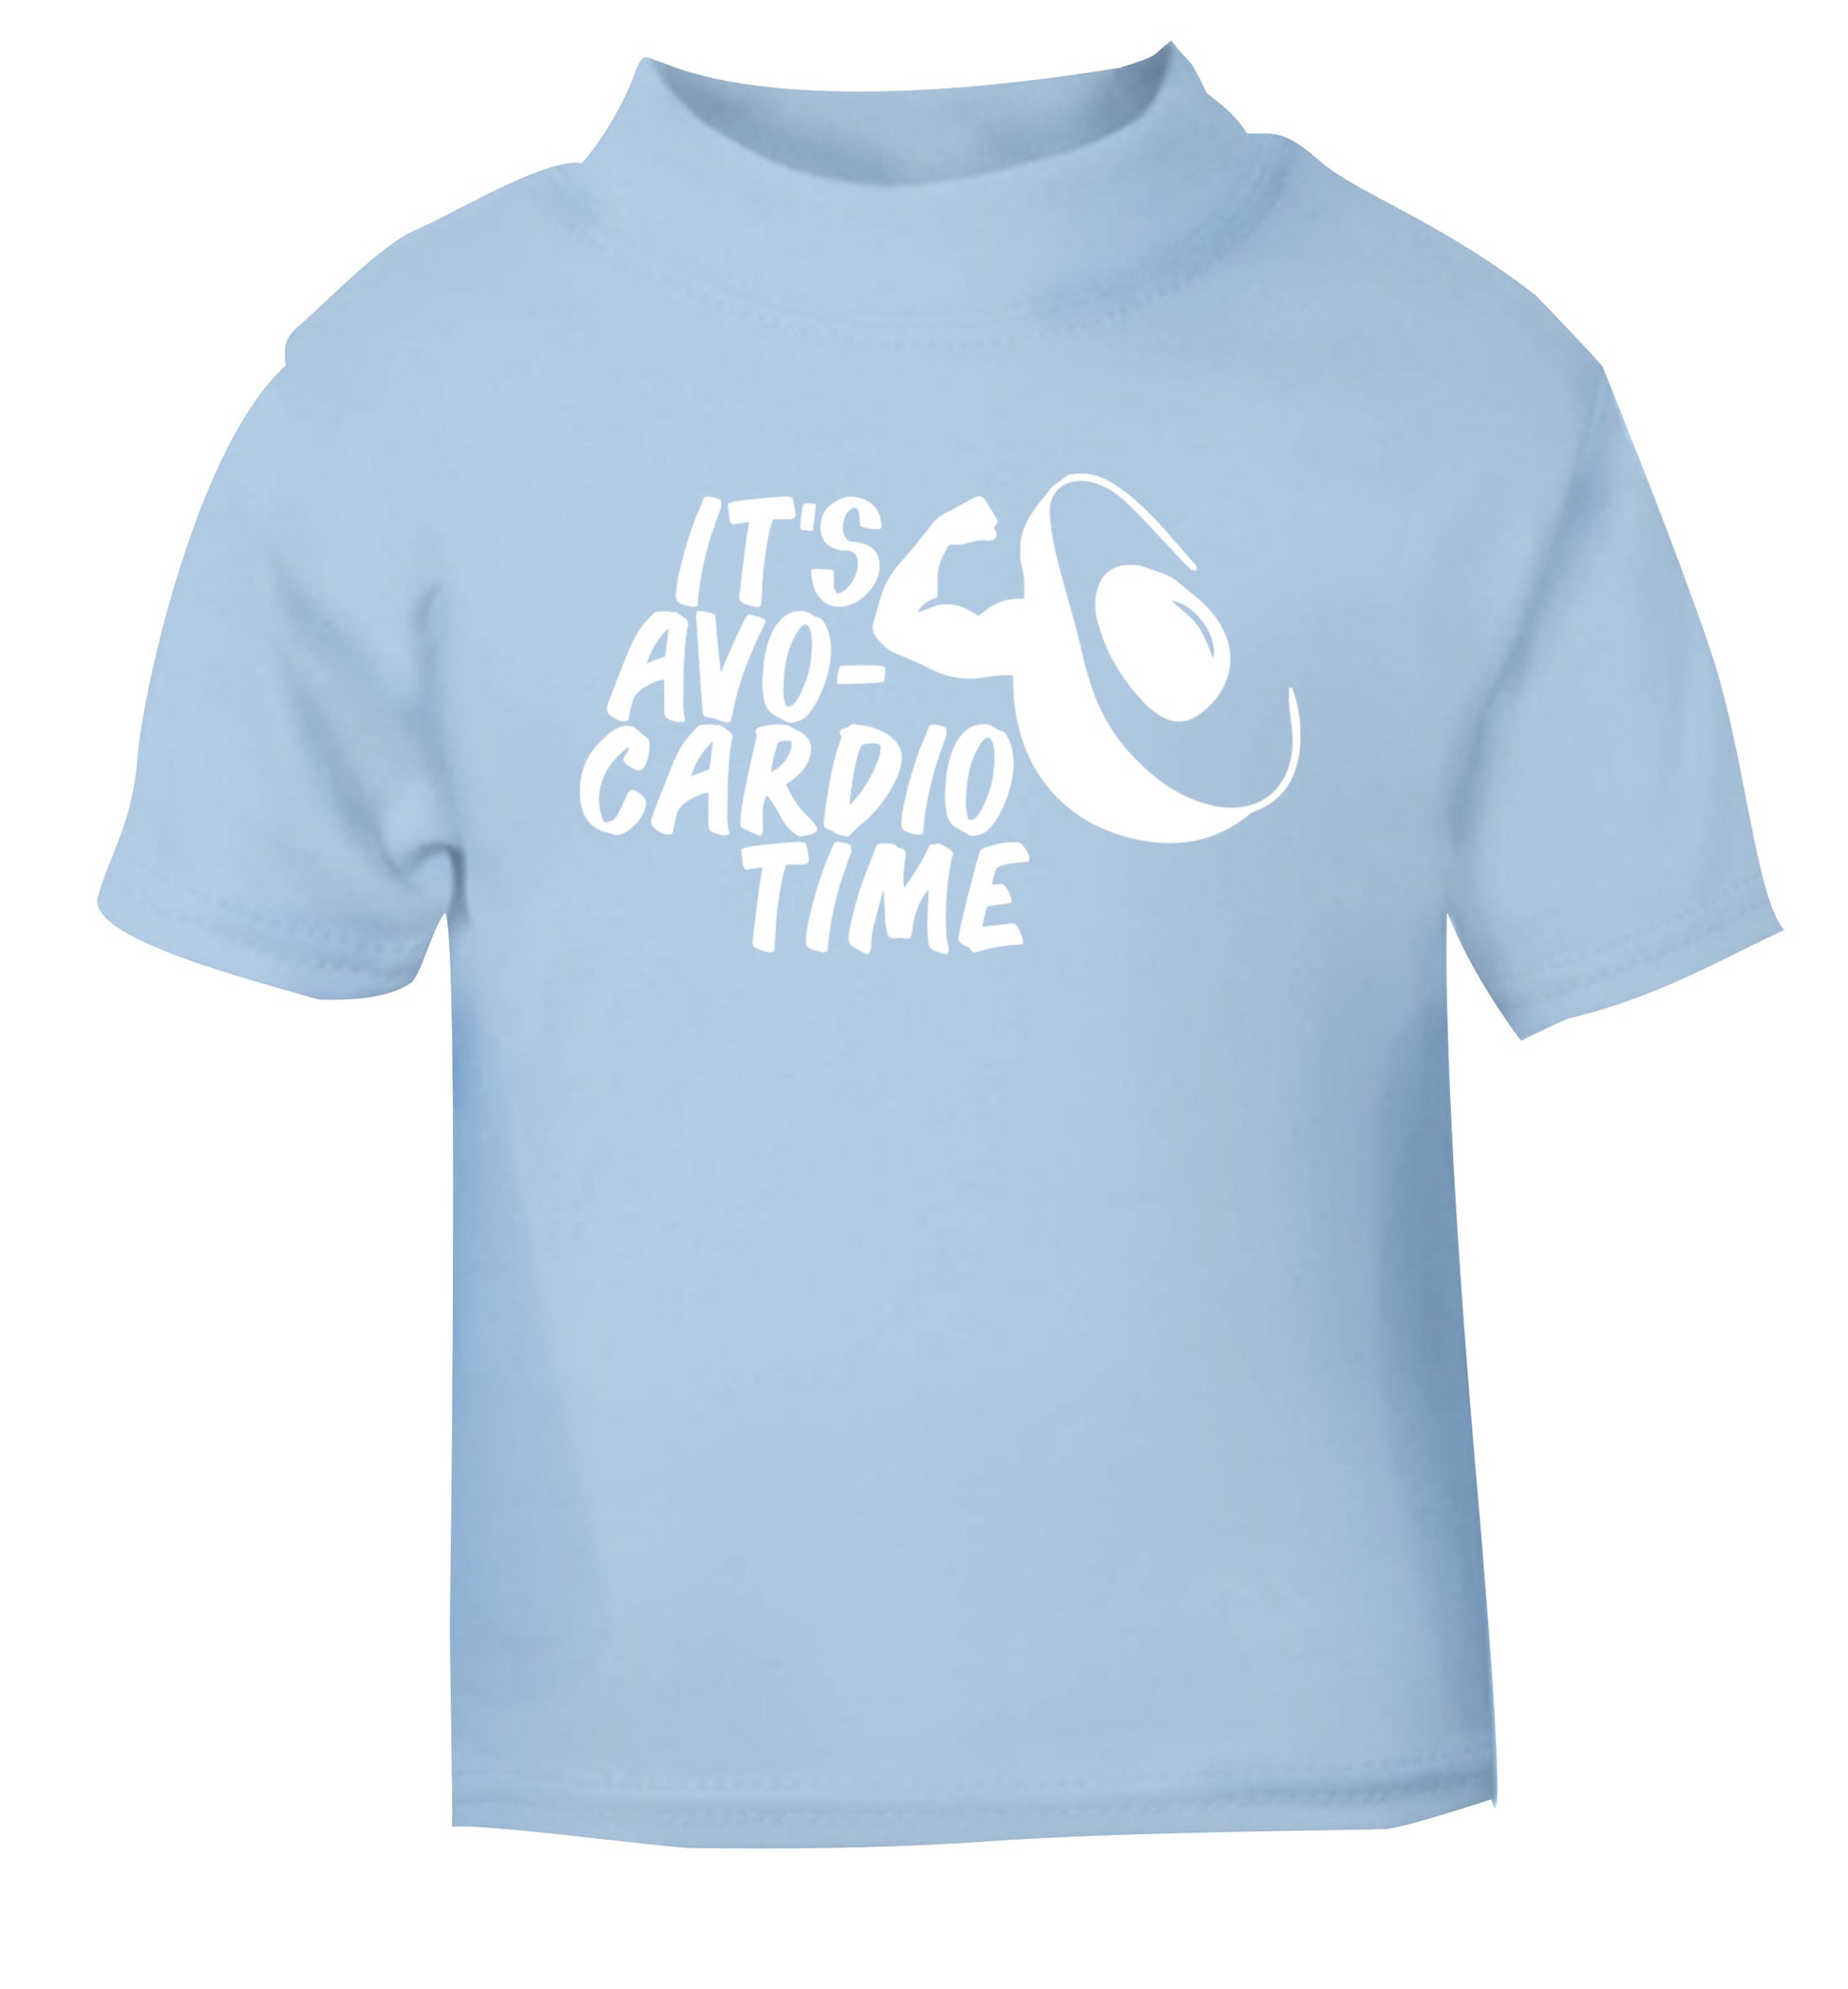 It's avo-cardio time light blue Baby Toddler Tshirt 2 Years